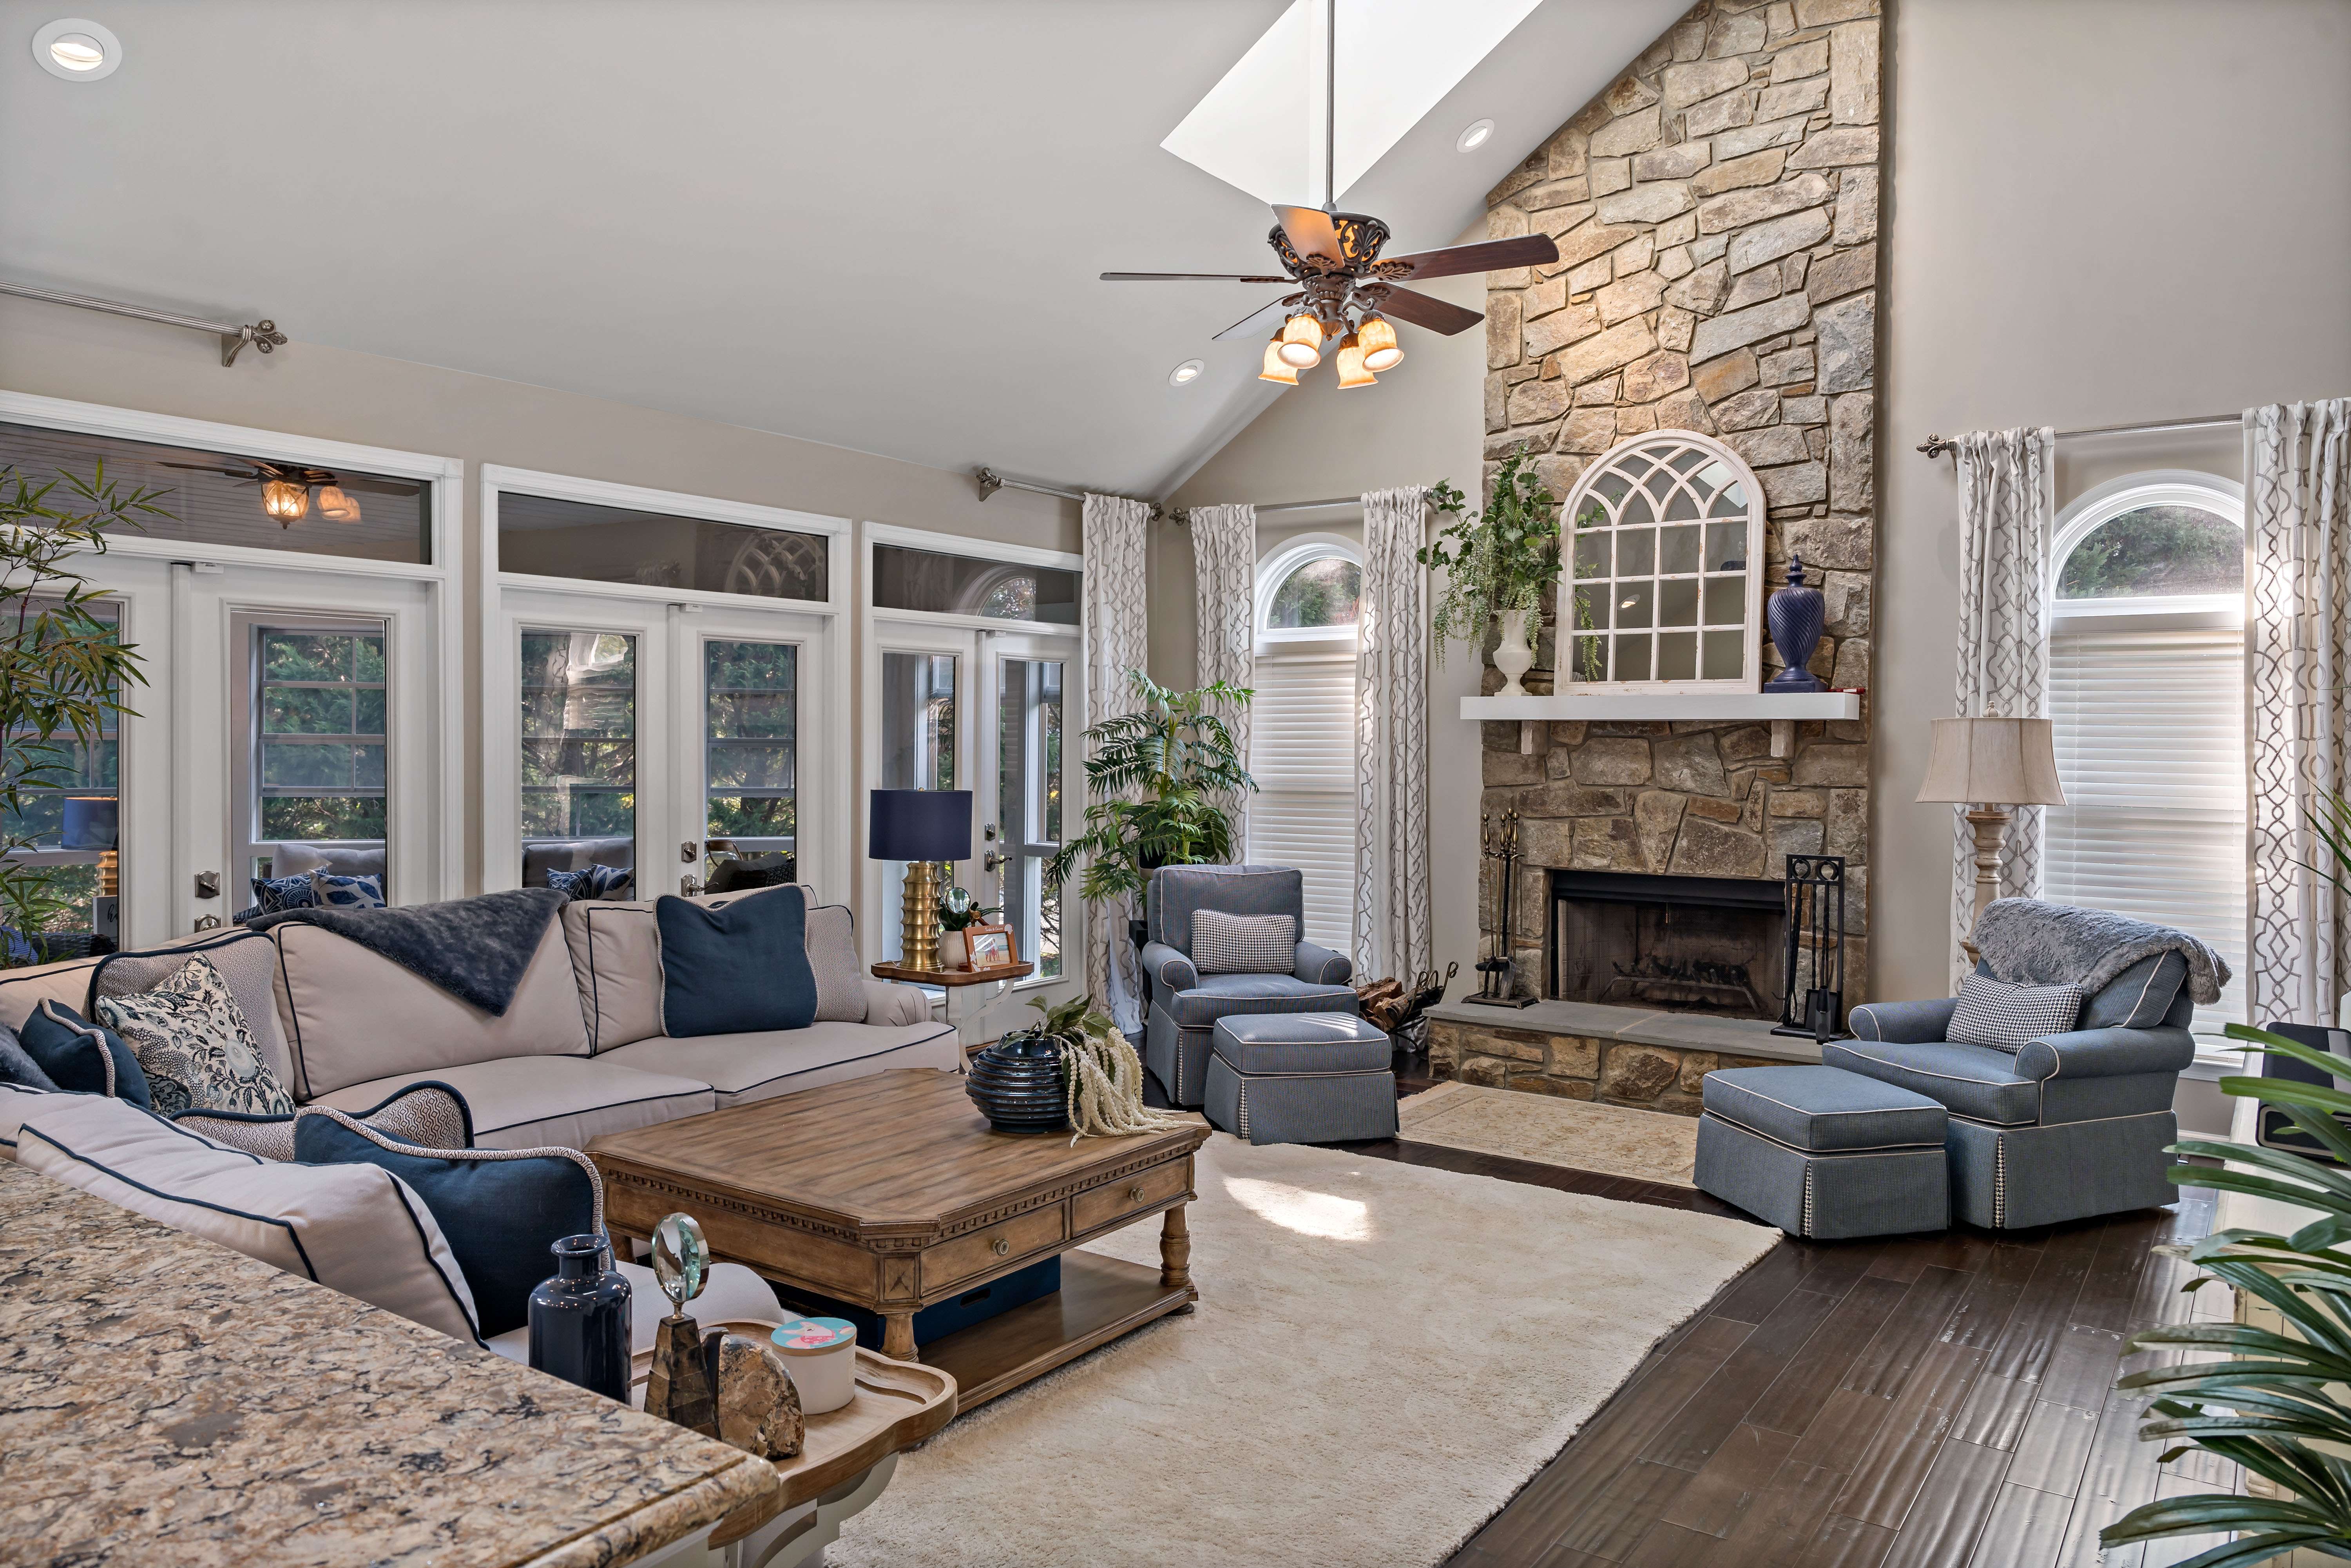 Gorgeous living room with stone fireplace and slanted ceiling